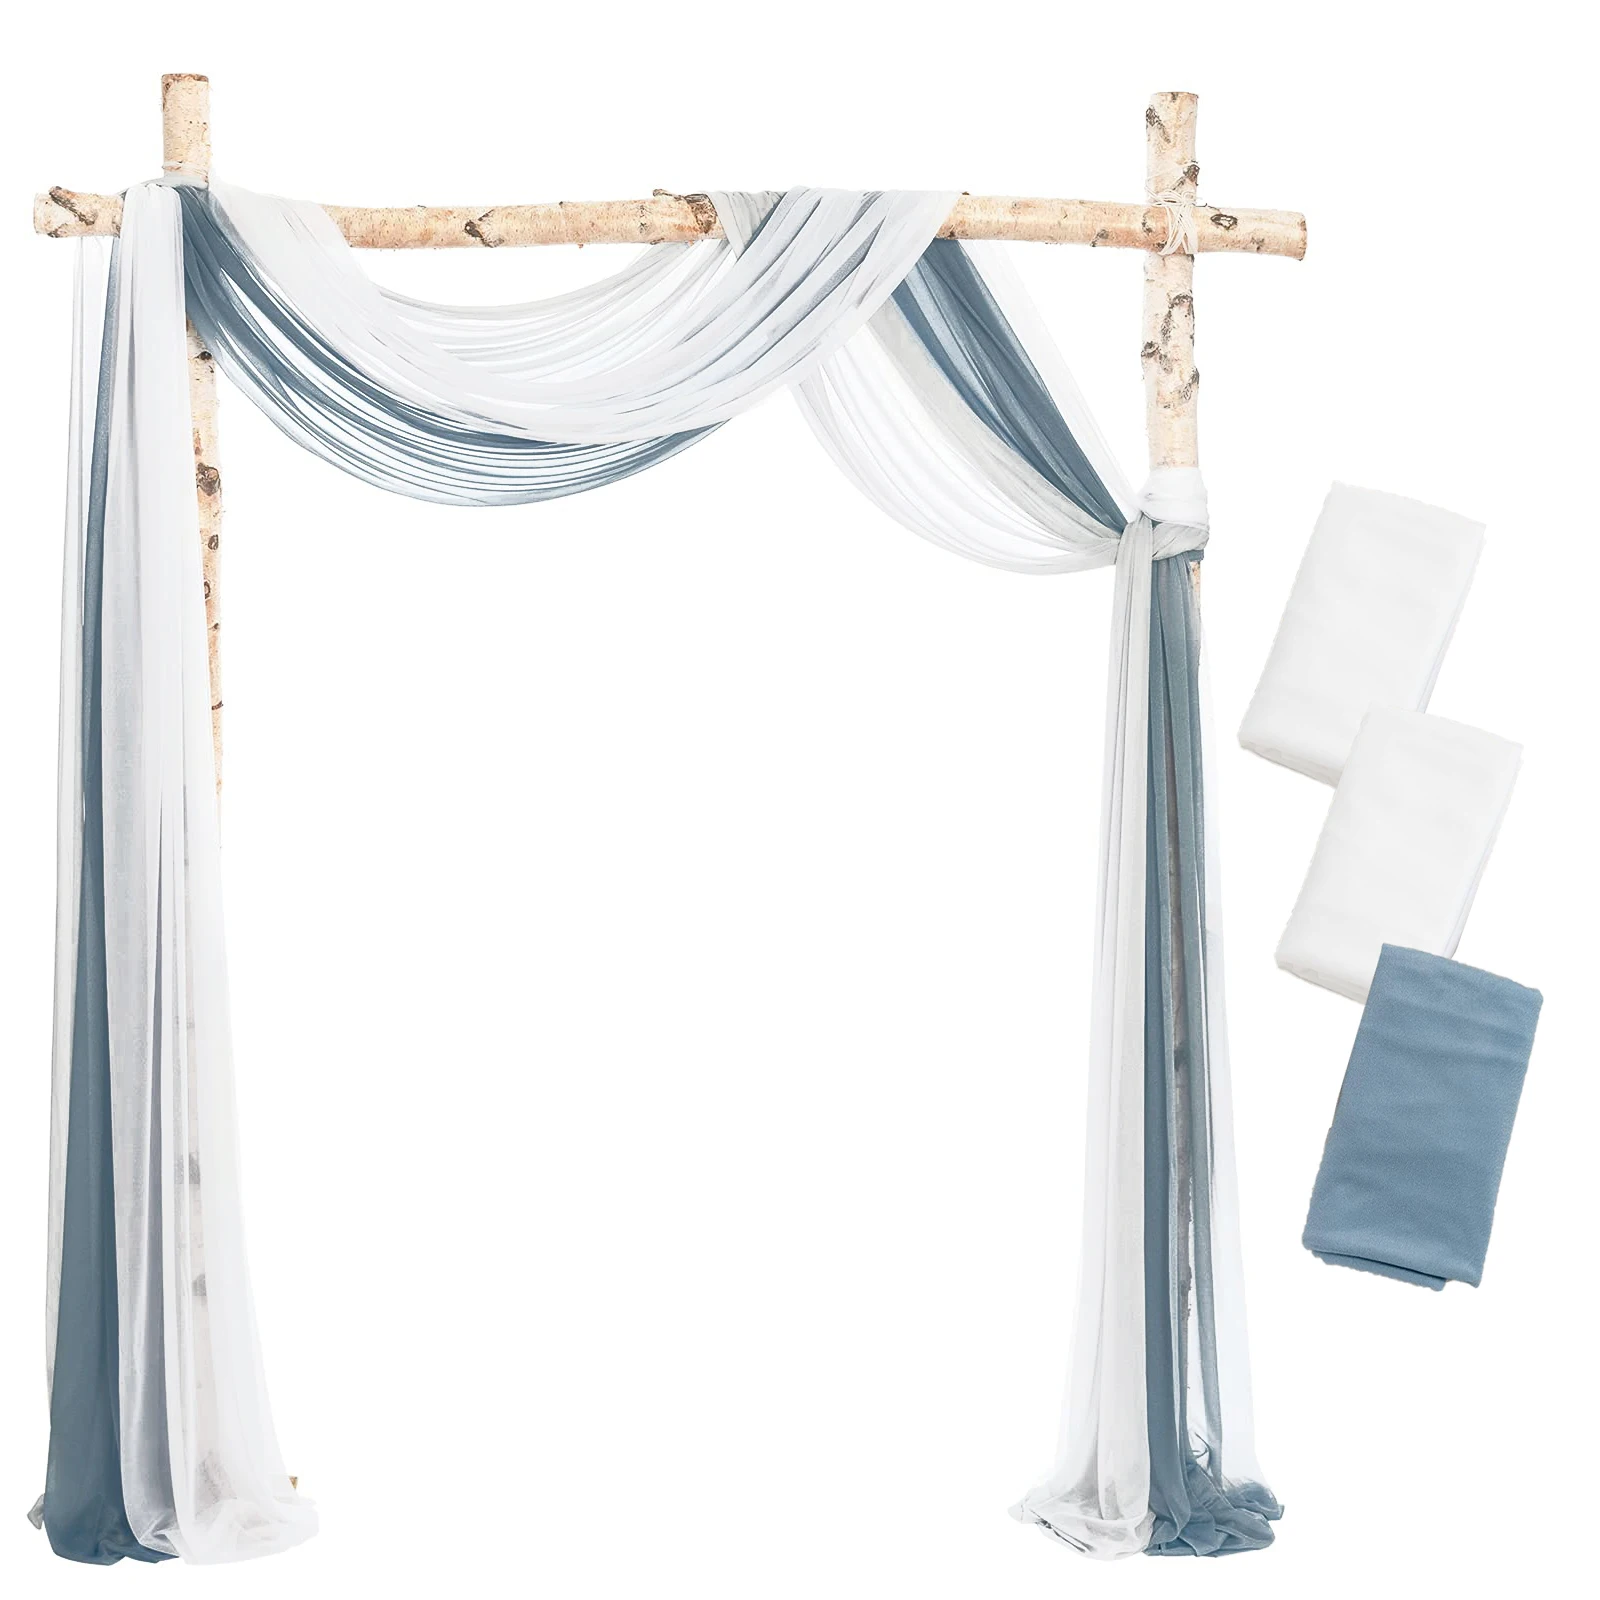 

3PCS set Wedding Arch Drape Blue Sheer Chiffon Tulle Curtain Draping Backdrop Party Supplies Home Drapery Ceremony Decoration